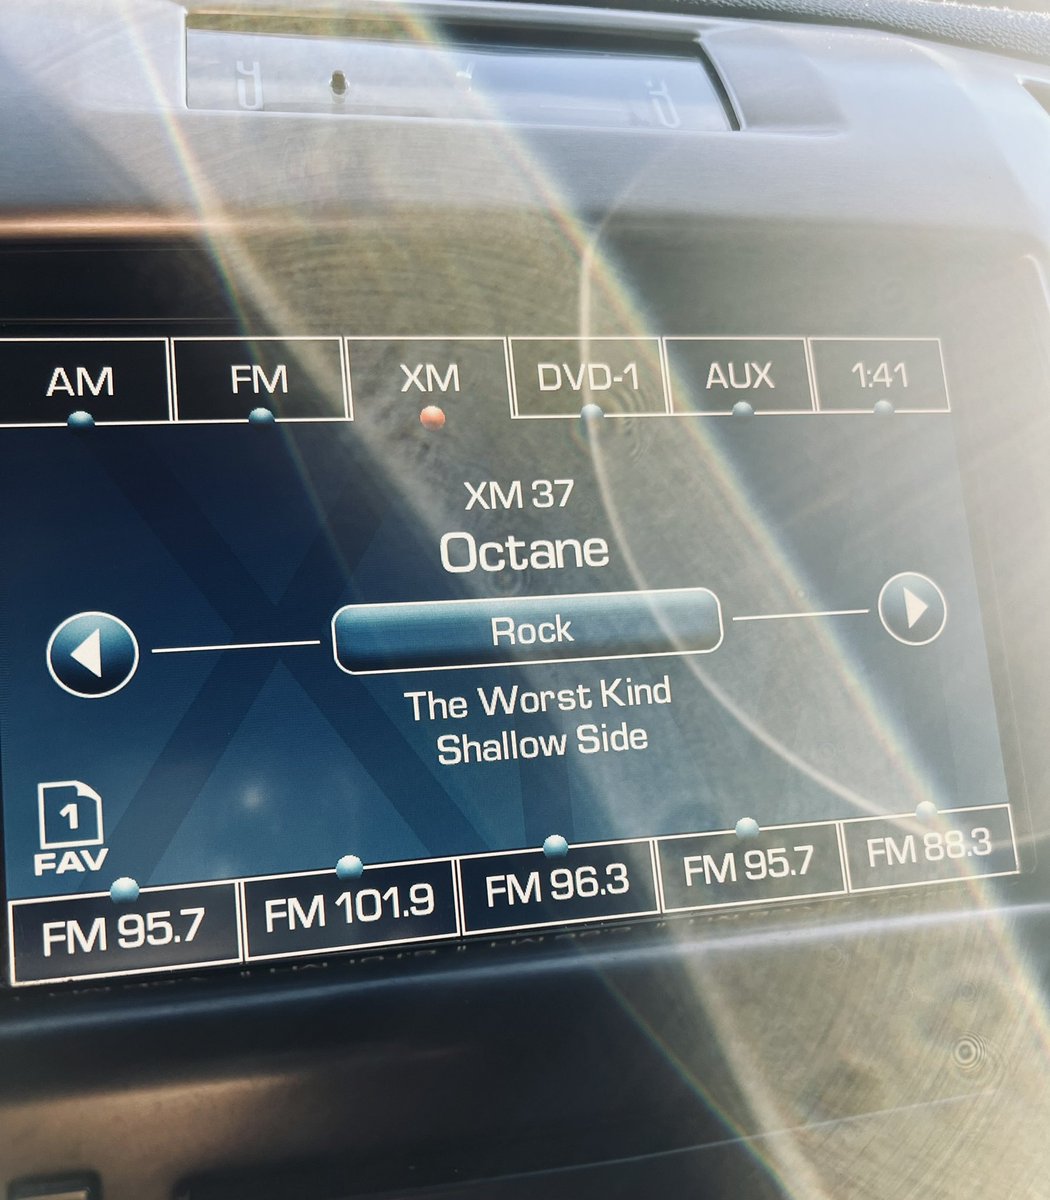 LETS FUGGIN GO @josemangin 🔥🔥 so stoked to hear this track on @SXMOctane Best radio station in the world!! @shallowsideband #TheWorstKind #OctaneTestDrive 🔊🔊🔊